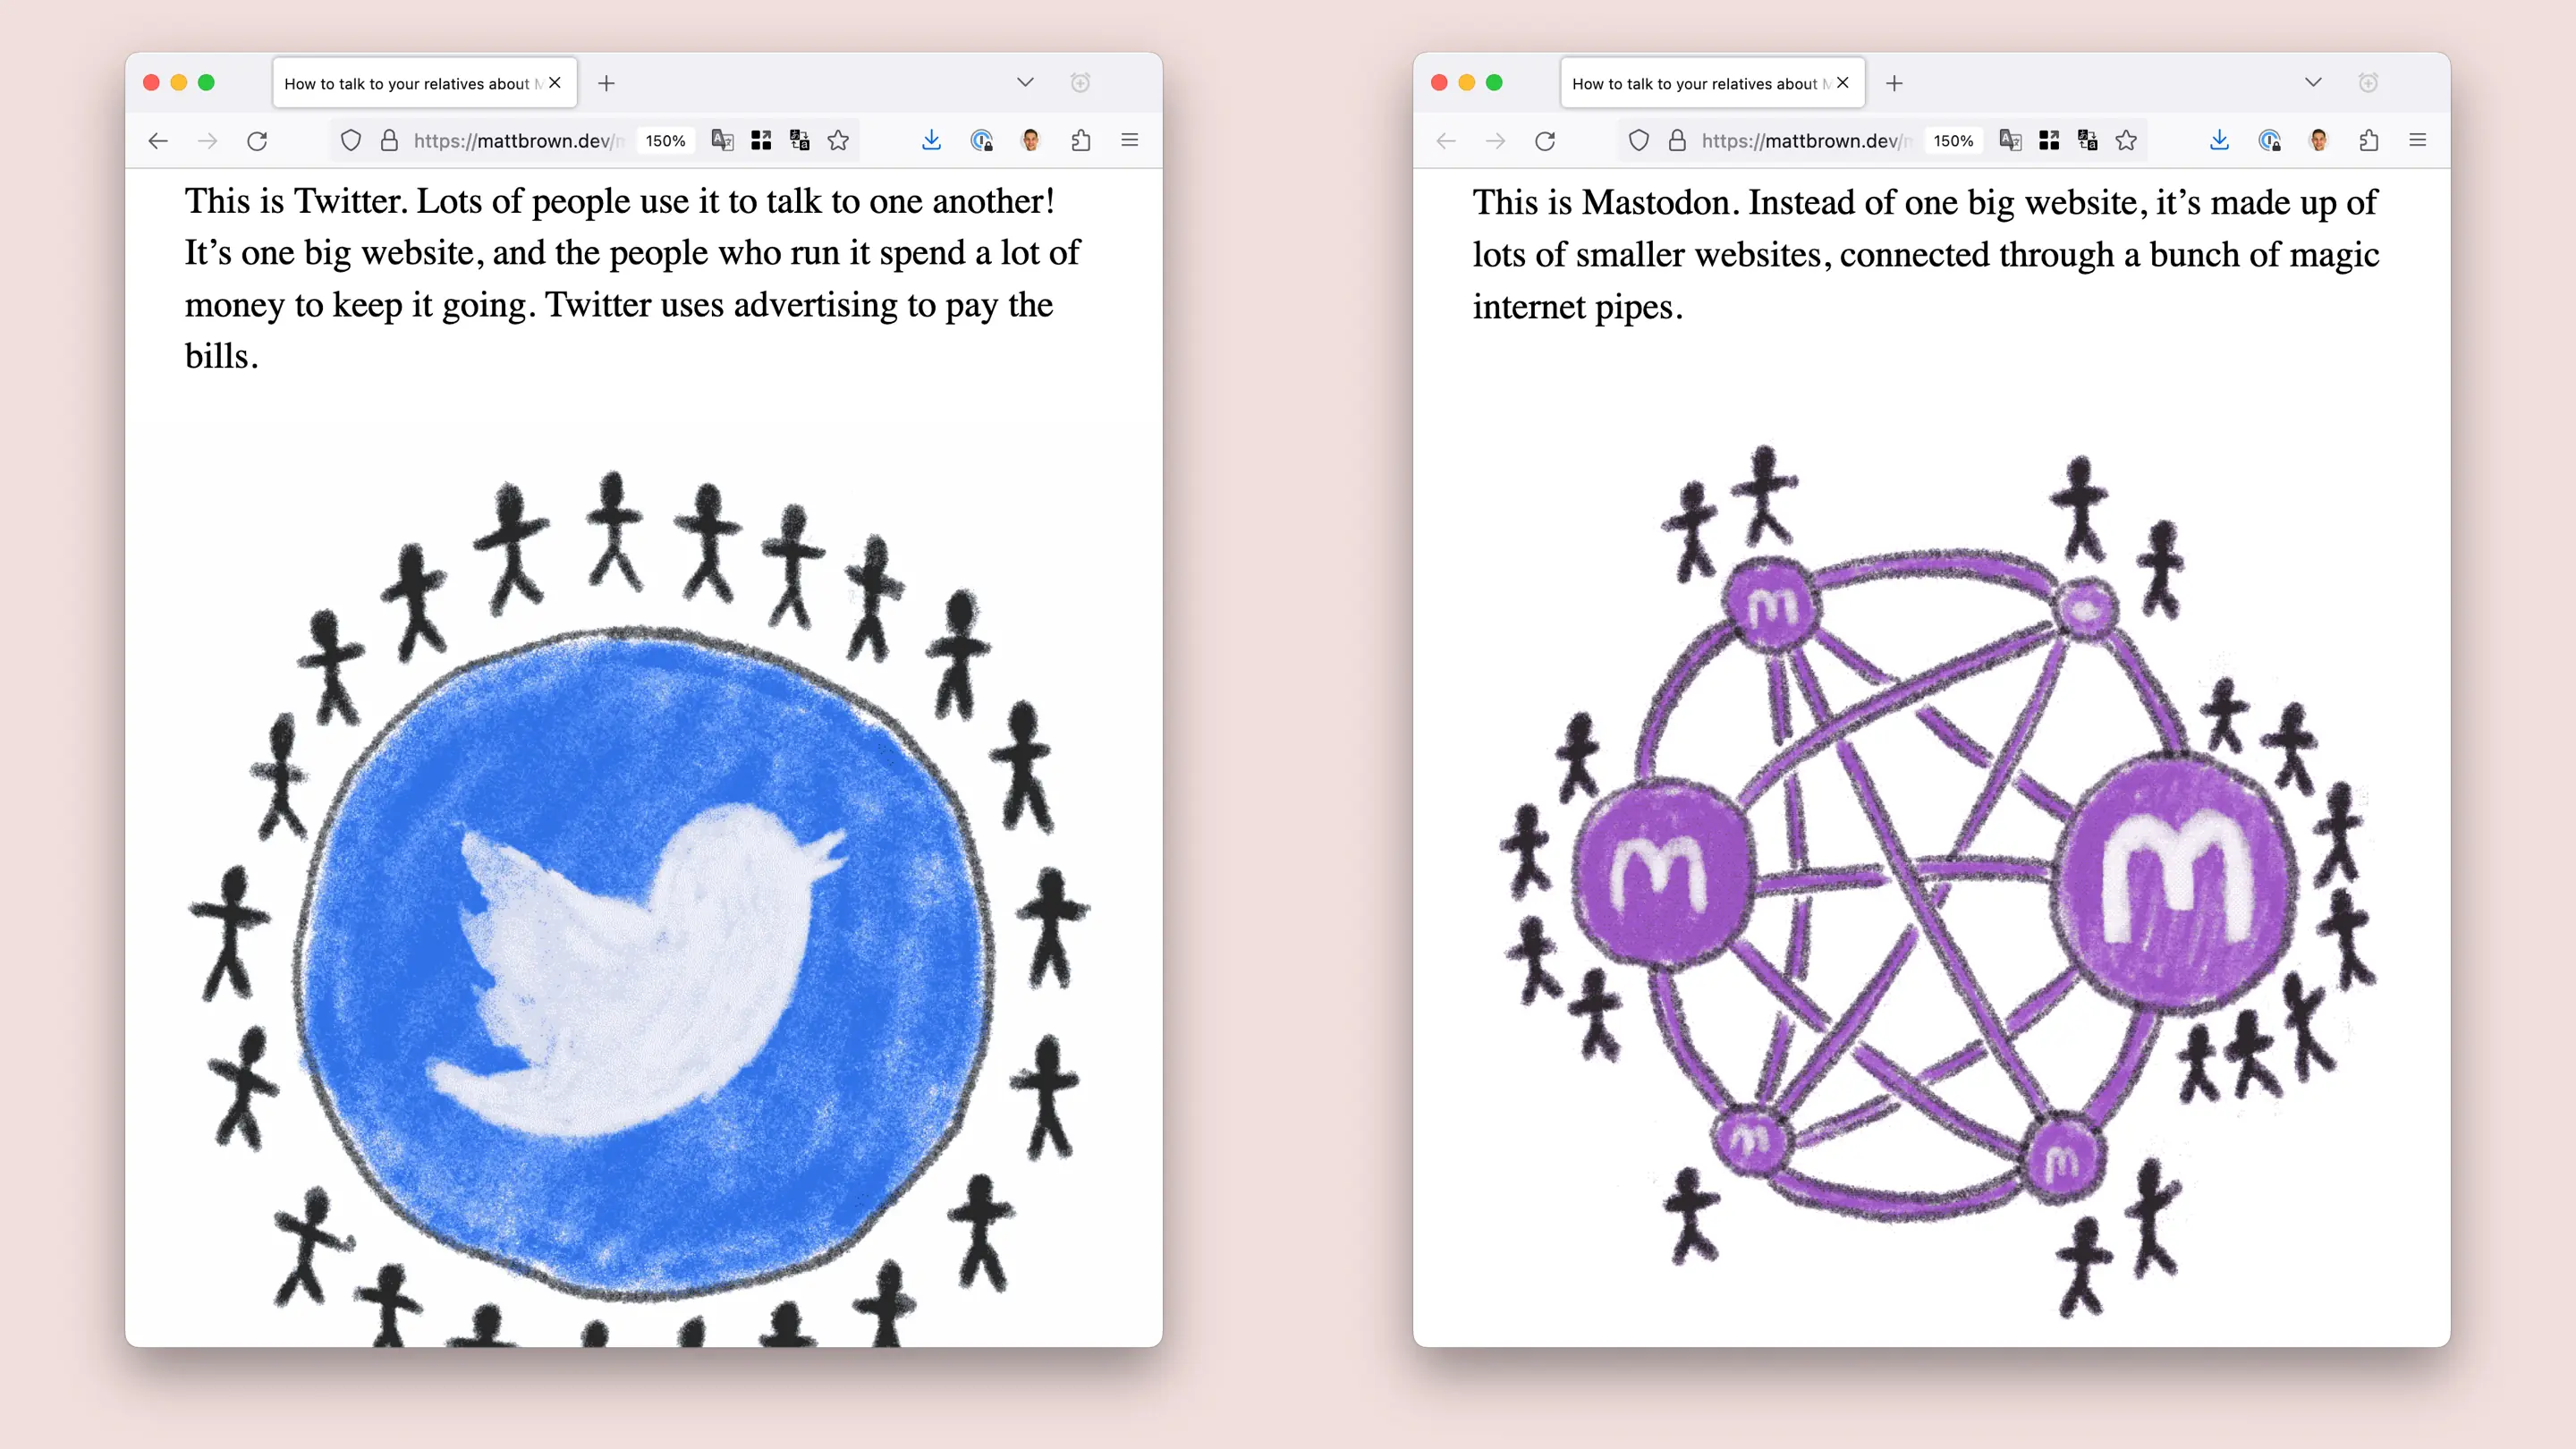 Two diagrams. Left is a circle with the Twitter logo on it that is surrounded by people. Right is several much smaller circles of varying sizes with the Mastodon logo on them. They are surrounded by smaller groups of people proportional to the size of the circle. Lines connect every circle to the other circle.